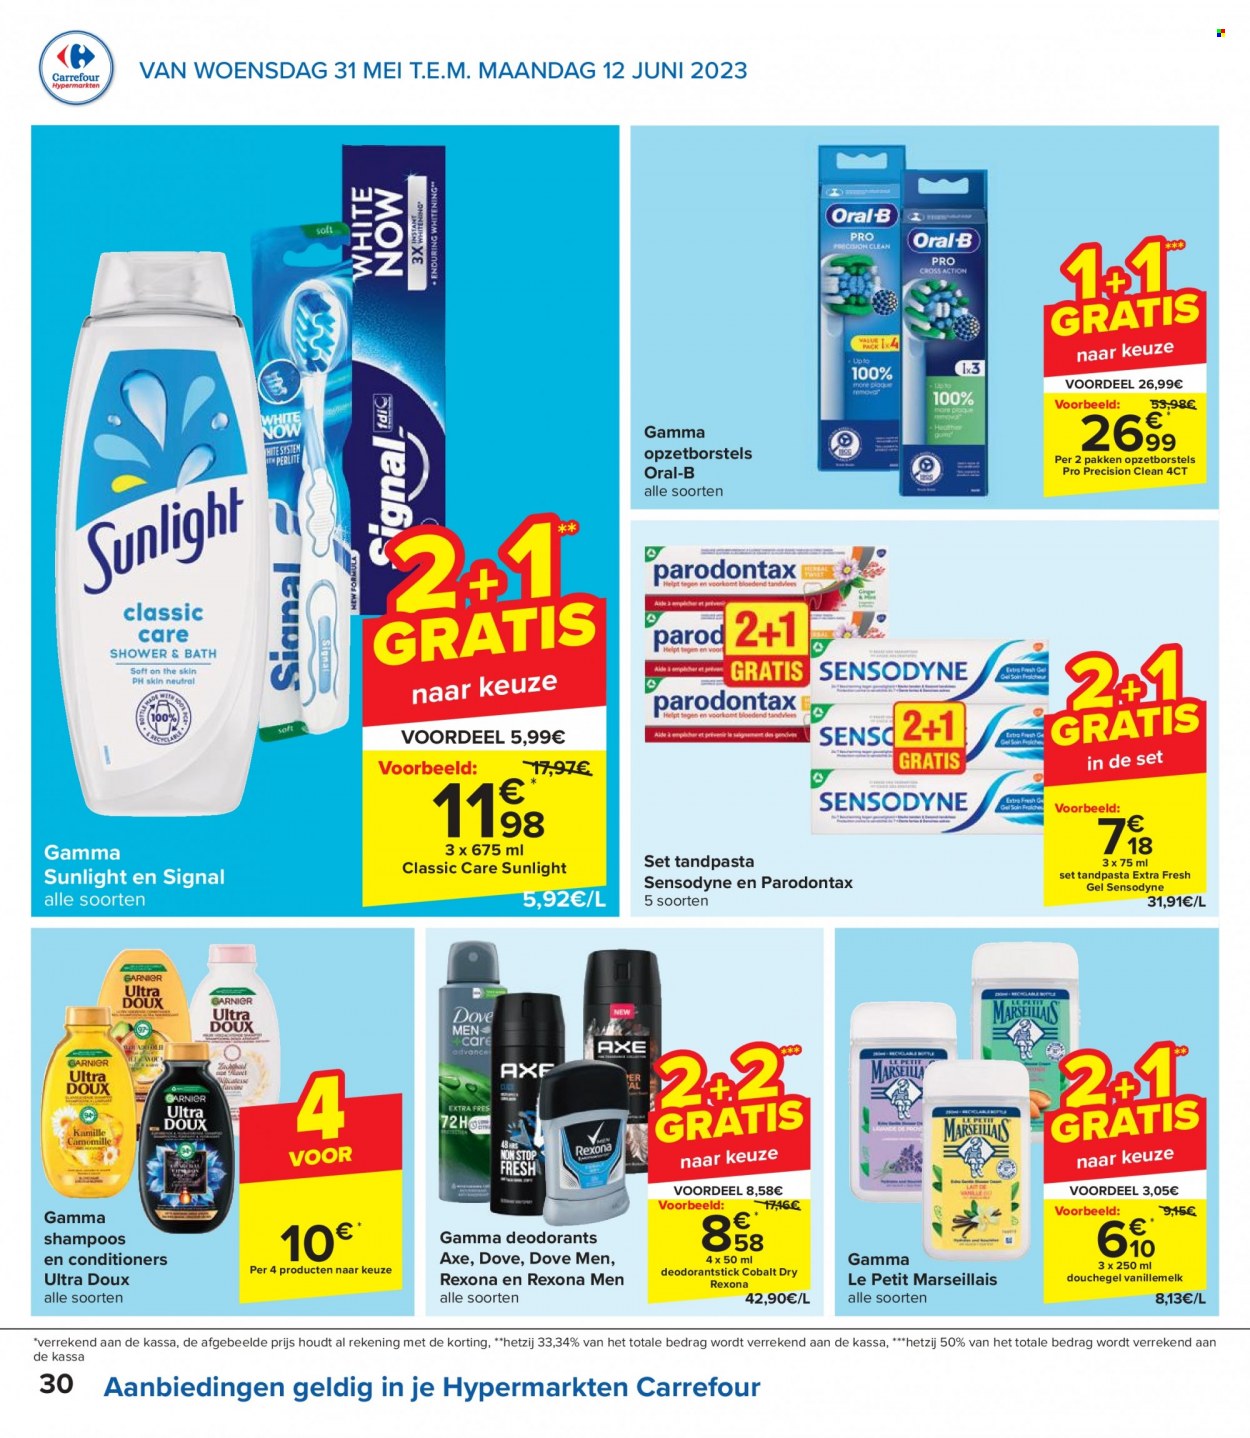 Catalogue Carrefour hypermarkt - 31.5.2023 - 12.6.2023. Page 30.